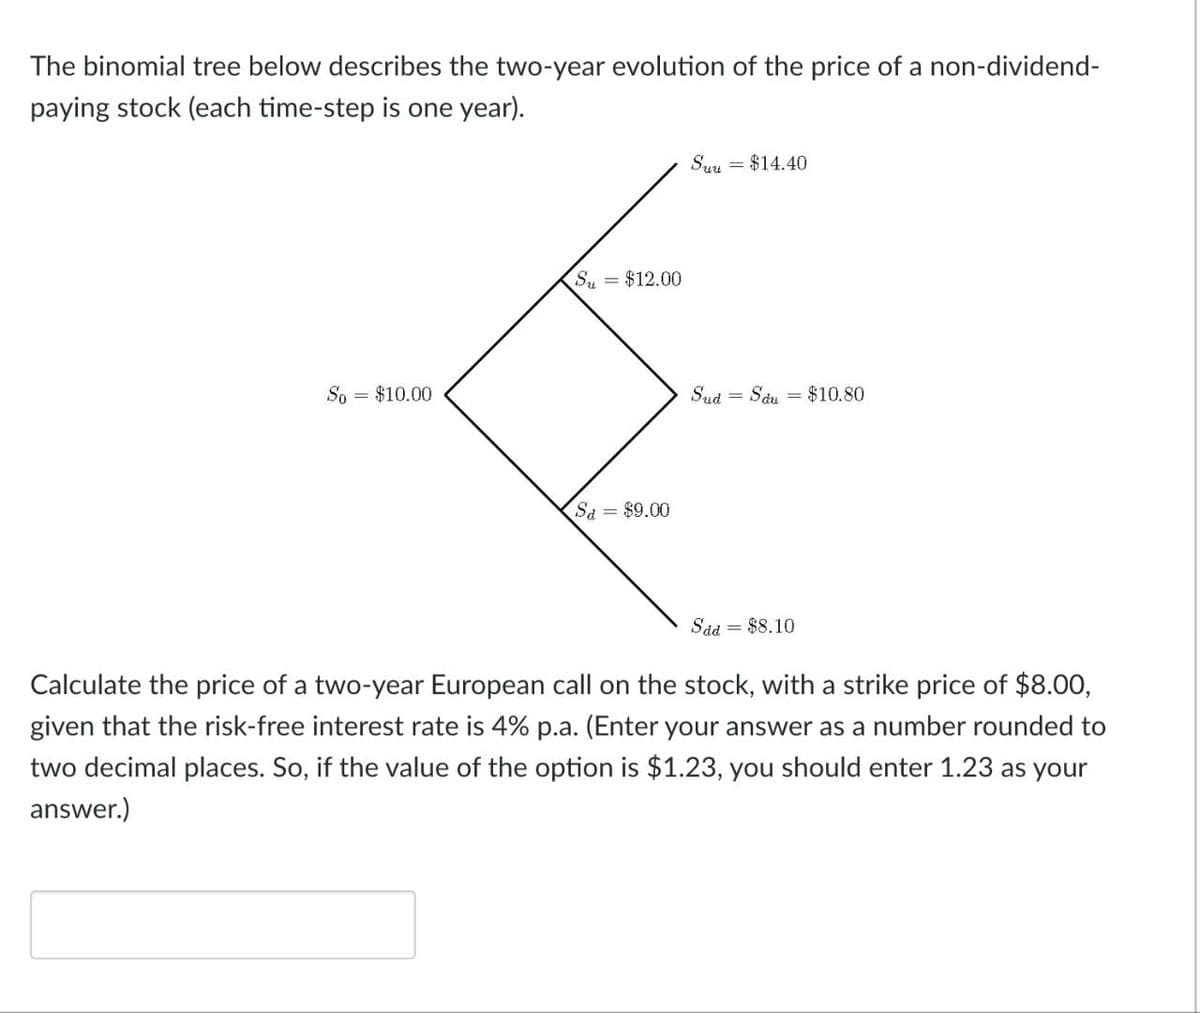 The binomial tree below describes the two-year evolution of the price of a non-dividend-
paying stock (each time-step is one year).
So
= $10.00
Su = $12.00
Sa = $9.00
Suu = $14.40
Sud =
Sdu = $10.80
Sad = $8.10
Calculate the price of a two-year European call on the stock, with a strike price of $8.00,
given that the risk-free interest rate is 4% p.a. (Enter your answer as a number rounded to
two decimal places. So, if the value of the option is $1.23, you should enter 1.23 as your
answer.)